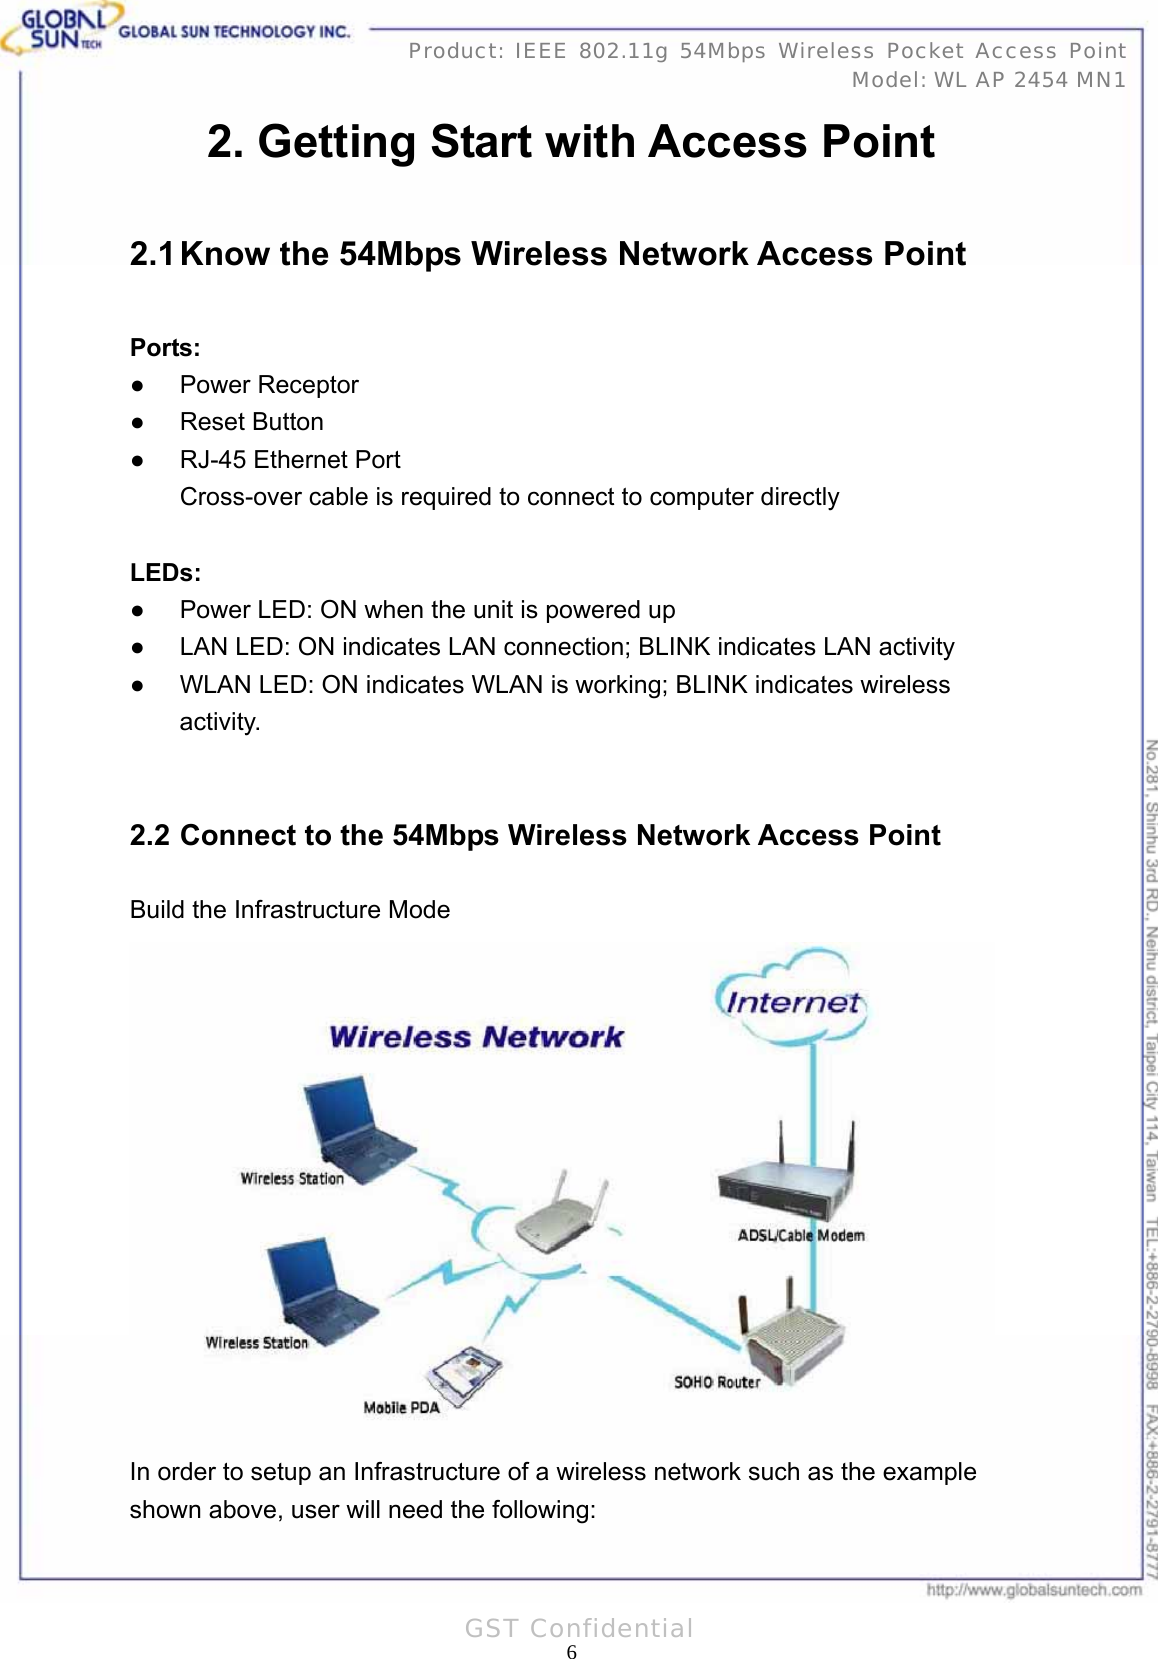   6Product: IEEE 802.11g 54Mbps Wireless Pocket Access Point Model: WL AP 2454 MN1GST Confidential 2. Getting Start with Access Point  2.1 Know the 54Mbps Wireless Network Access Point  Ports: ● Power Receptor ● Reset Button ●  RJ-45 Ethernet Port Cross-over cable is required to connect to computer directly  LEDs: ●  Power LED: ON when the unit is powered up ●  LAN LED: ON indicates LAN connection; BLINK indicates LAN activity ●  WLAN LED: ON indicates WLAN is working; BLINK indicates wireless activity.  2.2 Connect to the 54Mbps Wireless Network Access Point Build the Infrastructure Mode  In order to setup an Infrastructure of a wireless network such as the example shown above, user will need the following: 